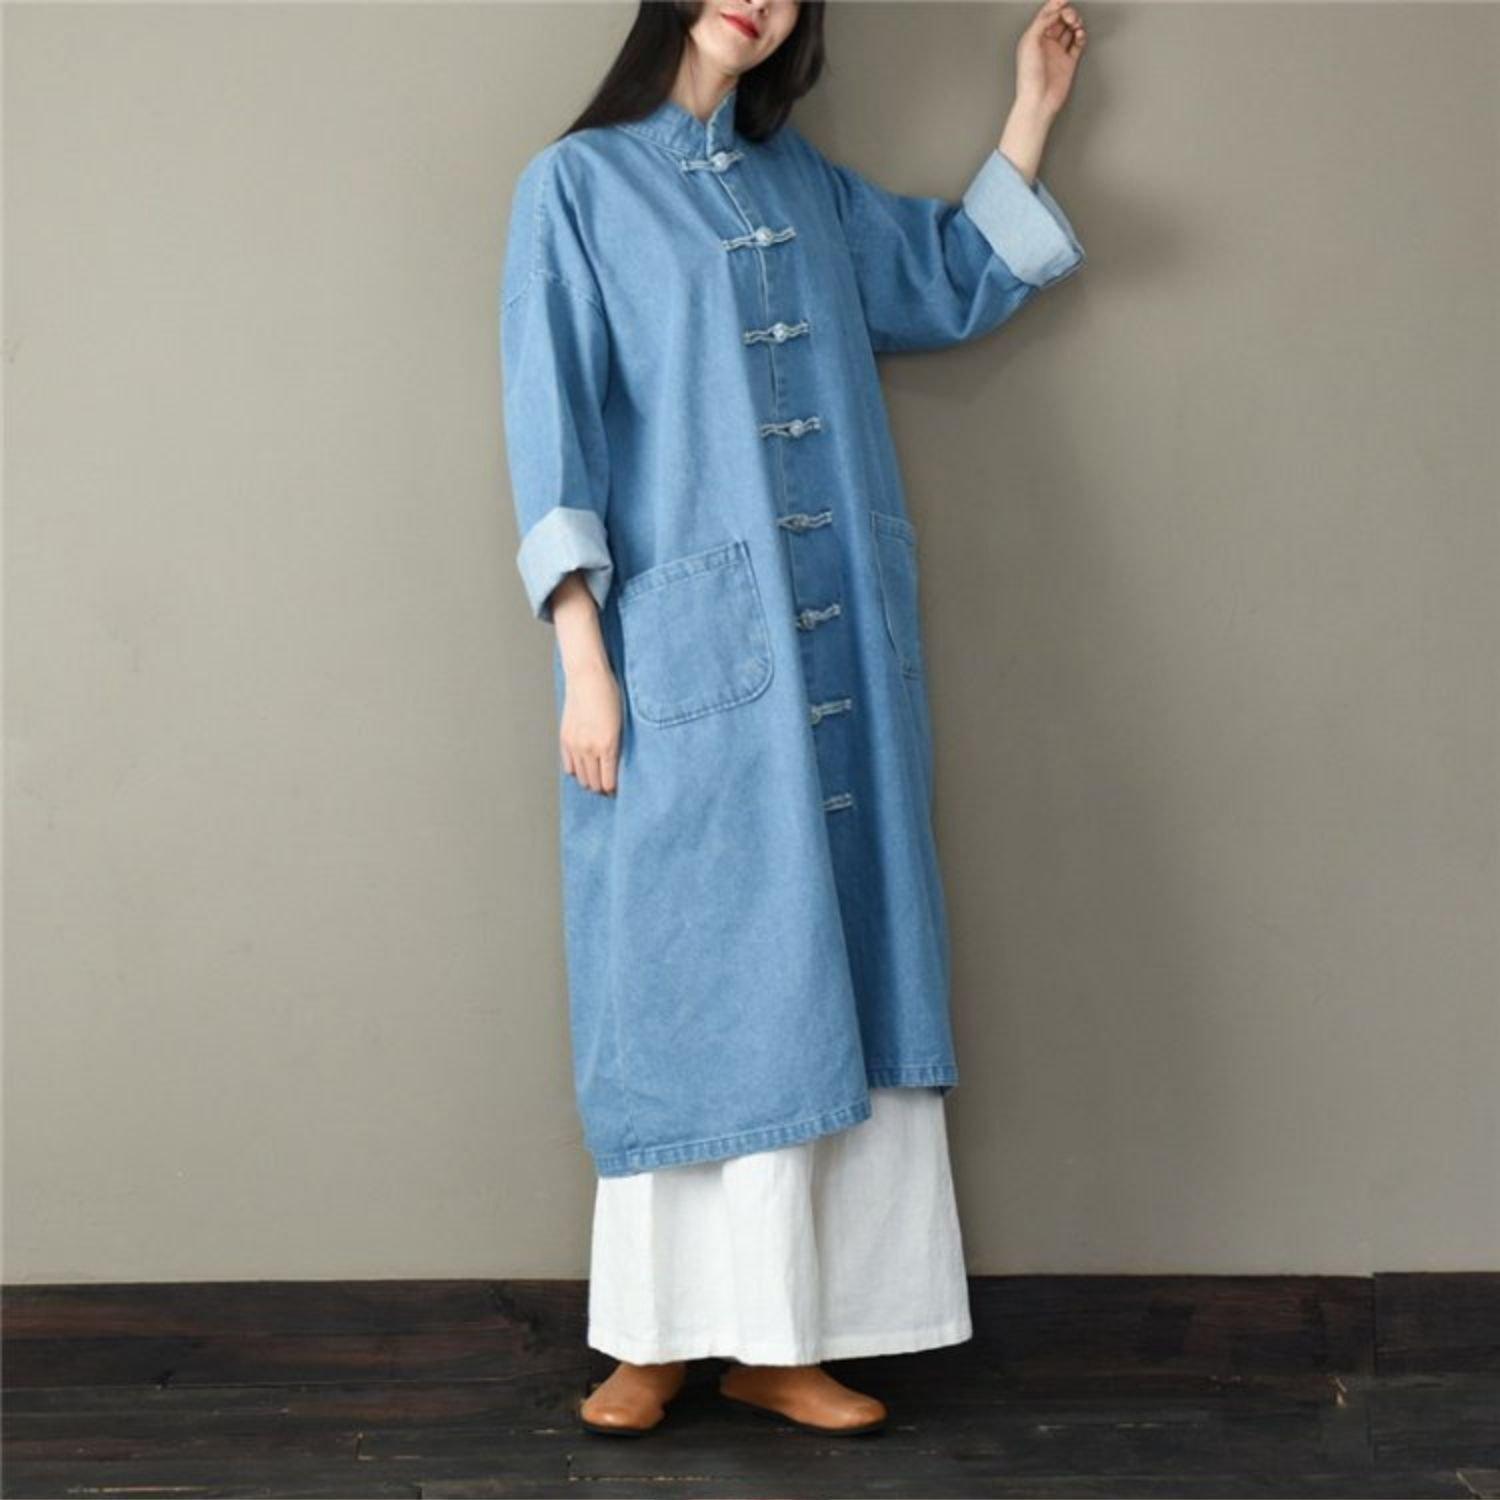 Unique stand collar Fashion spring tunic pattern light blue short coat - Omychic